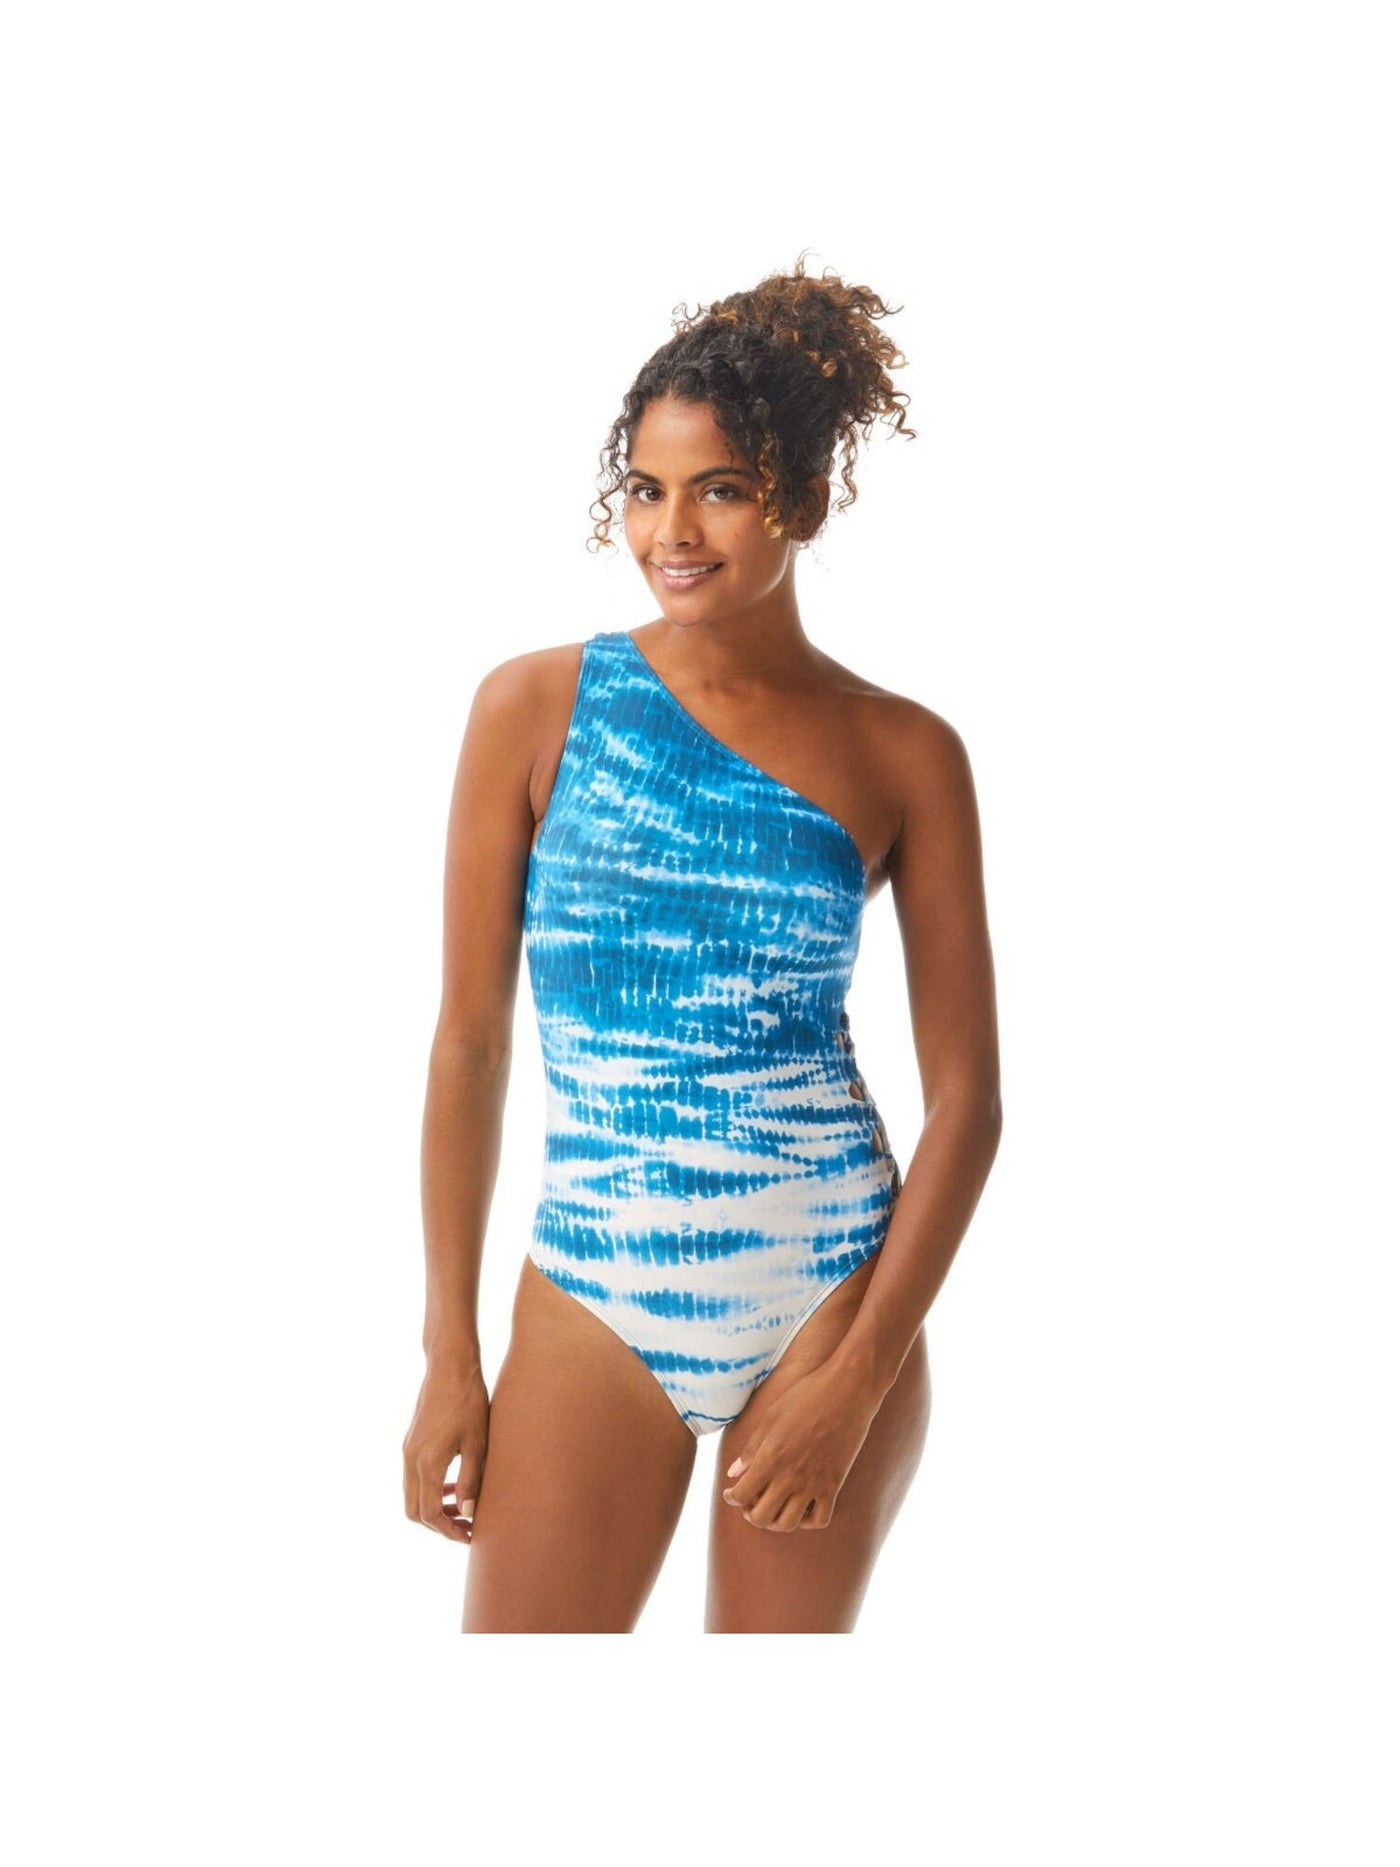 VINCE CAMUTO Women's Blue Tie Dye Stretch Lined Strappy-Side Moderate Coverage Cutout One Shoulder One Piece Swimsuit 4